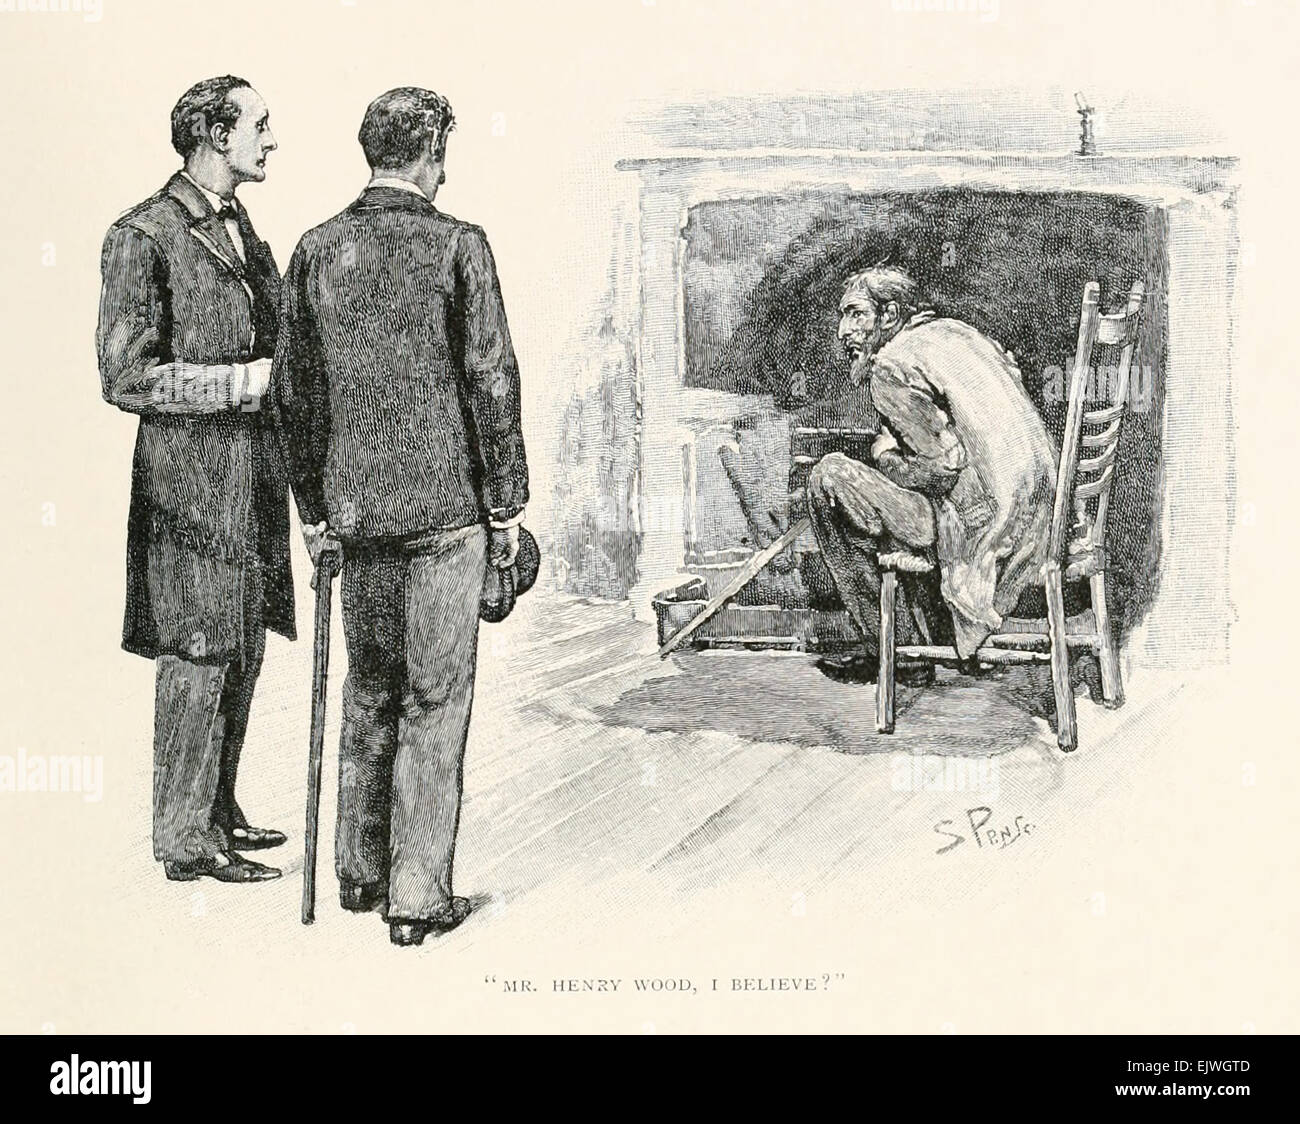 Mr Henry Wood, I believe - from 'The Crooked Man' by Arthur Conan Doyle (1859-1930). Illustration by Sidney Paget (1860-1908) from July 1893 edition of The Strand Magazine. See description for more information. Stock Photo